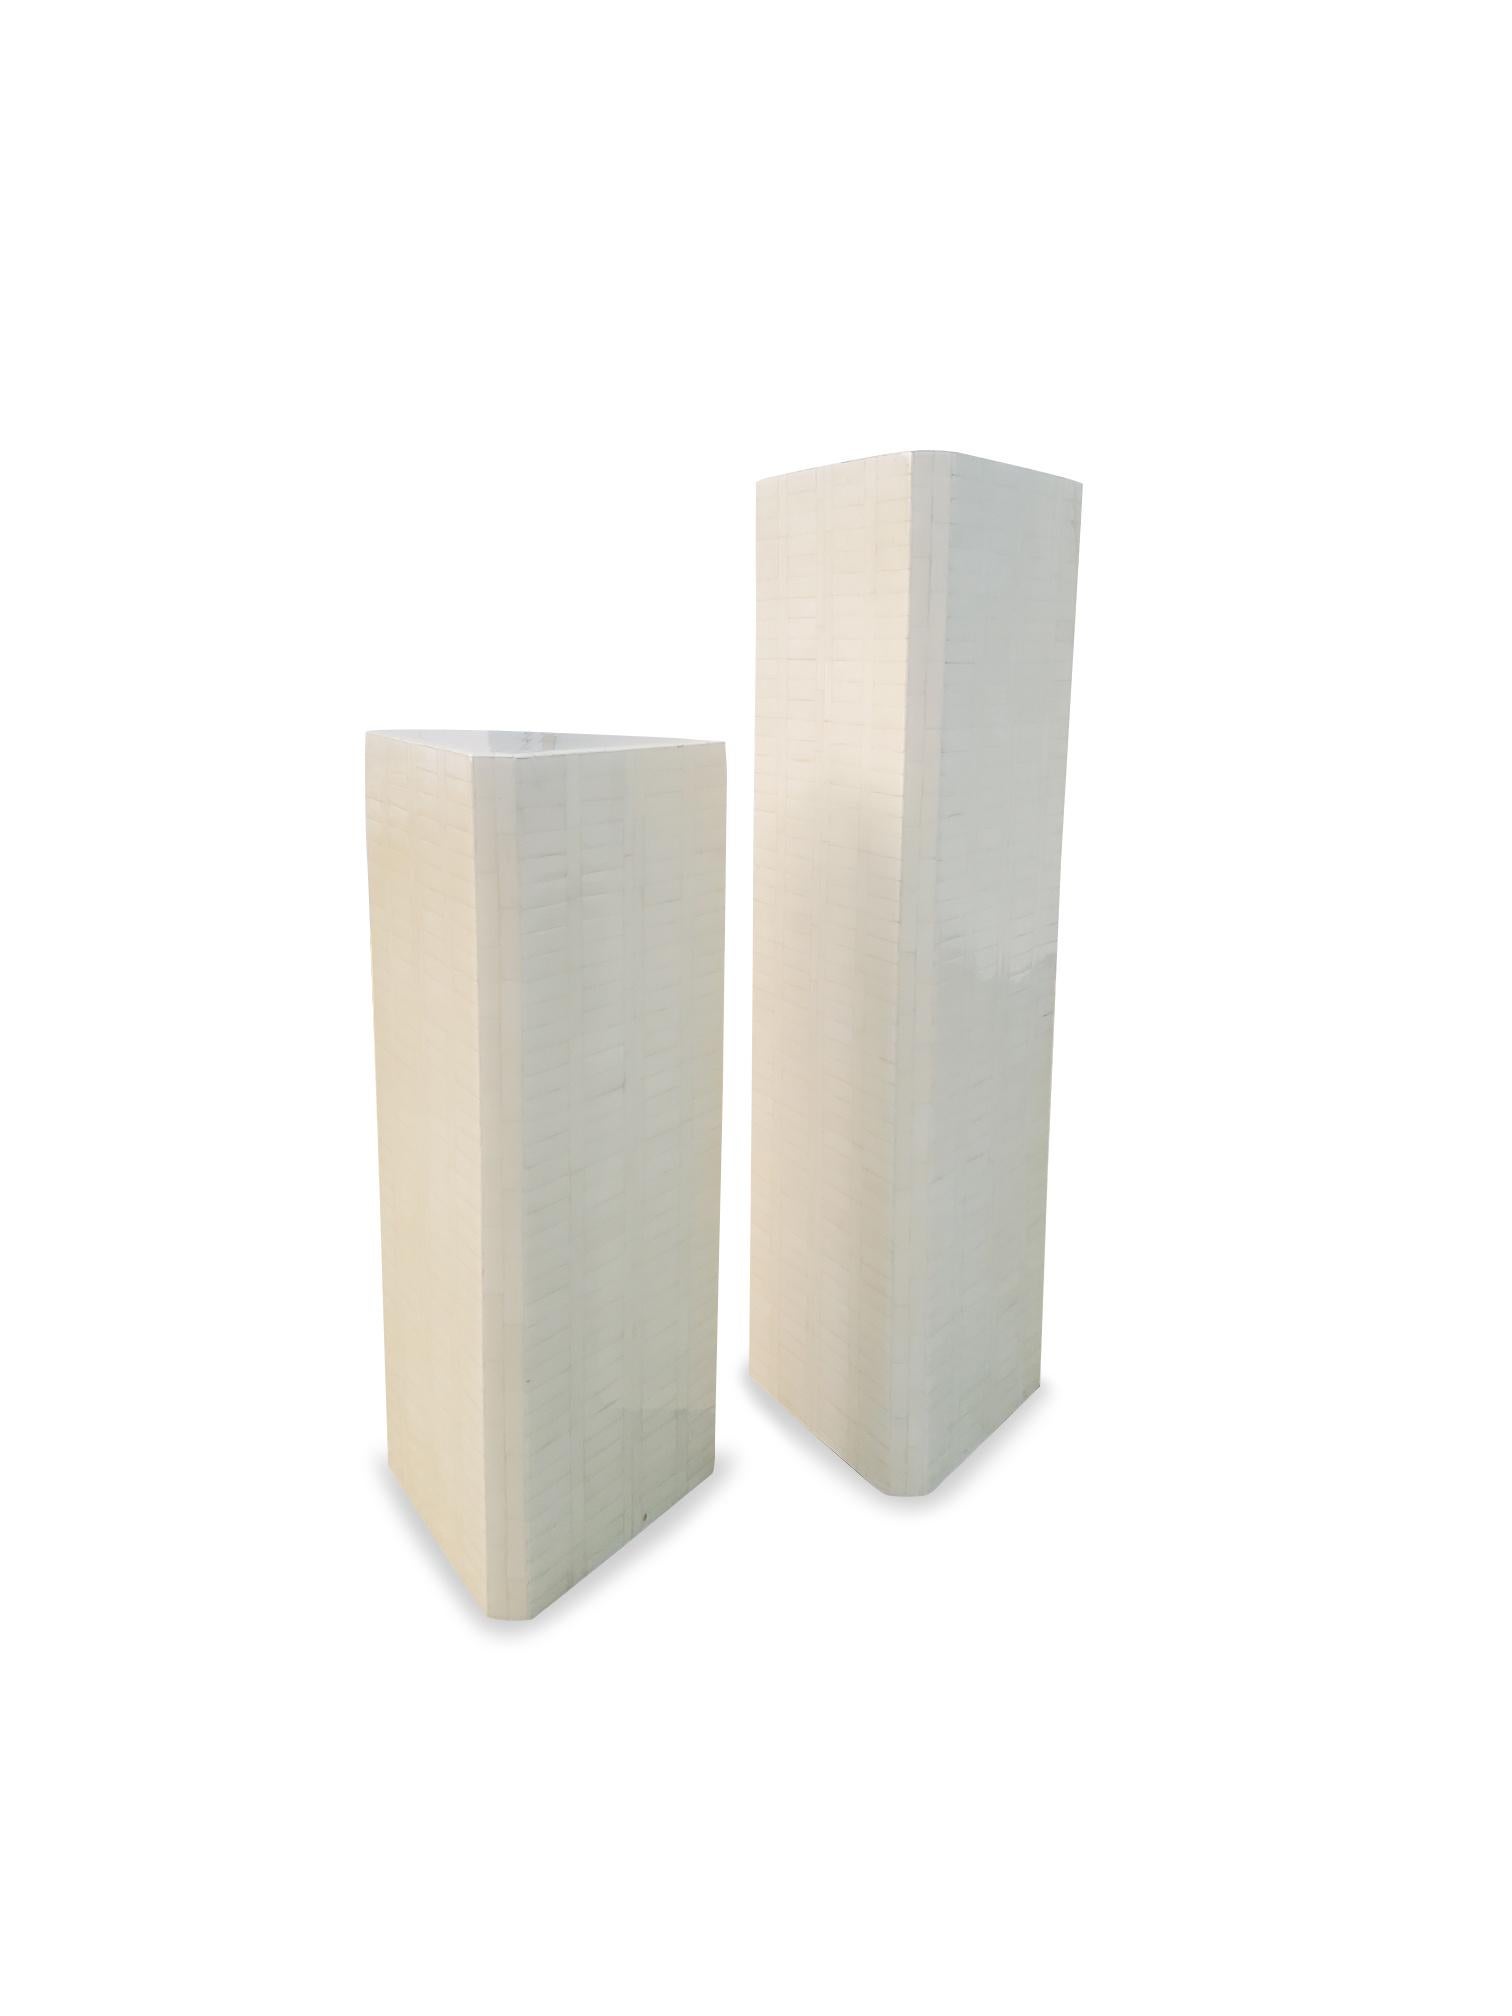 Pair of Enrique Garcel Tessellated Bone Tiered Pedestals 

Tall

13.25 W
11.75 D
40.25 H

Small
13.25 W
11.75 D
30.25 H